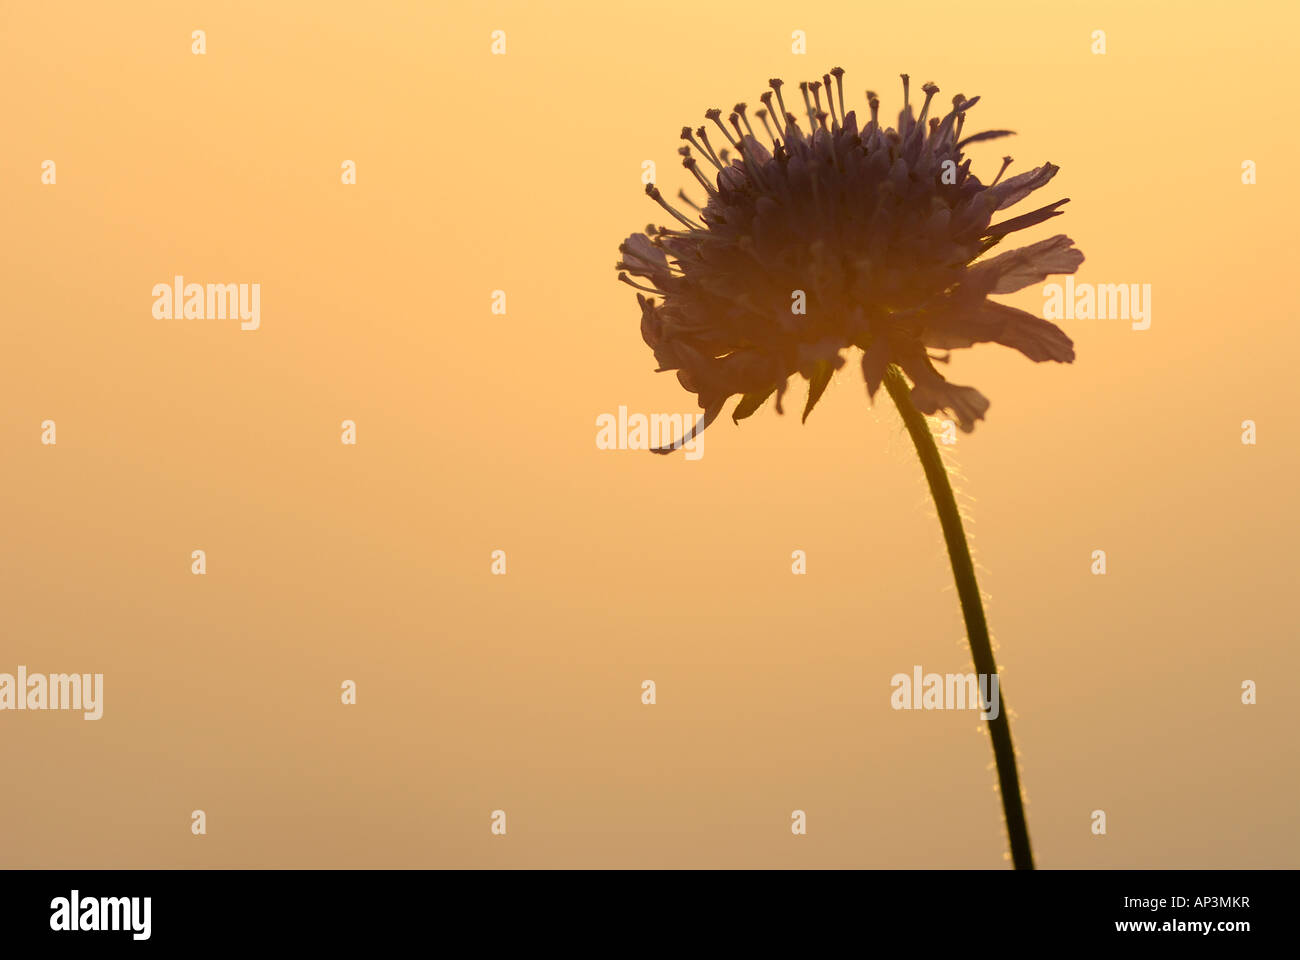 Silhouette of flower and stem at sunset Stock Photo